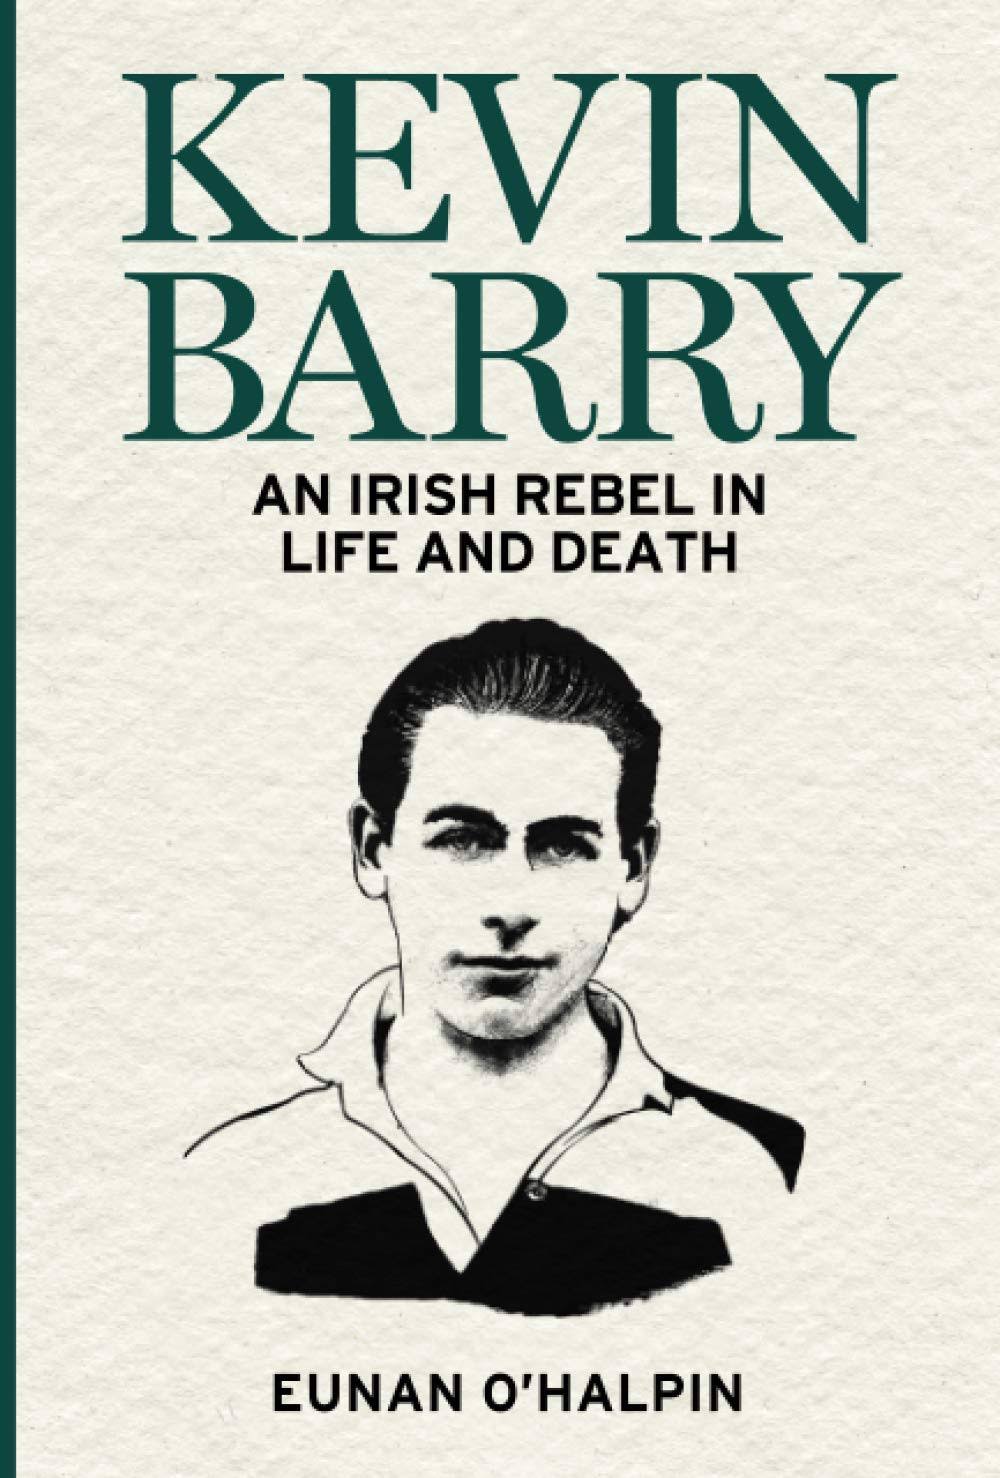 Kevin Barry: An Irish Rebel in Life and Death [Book]